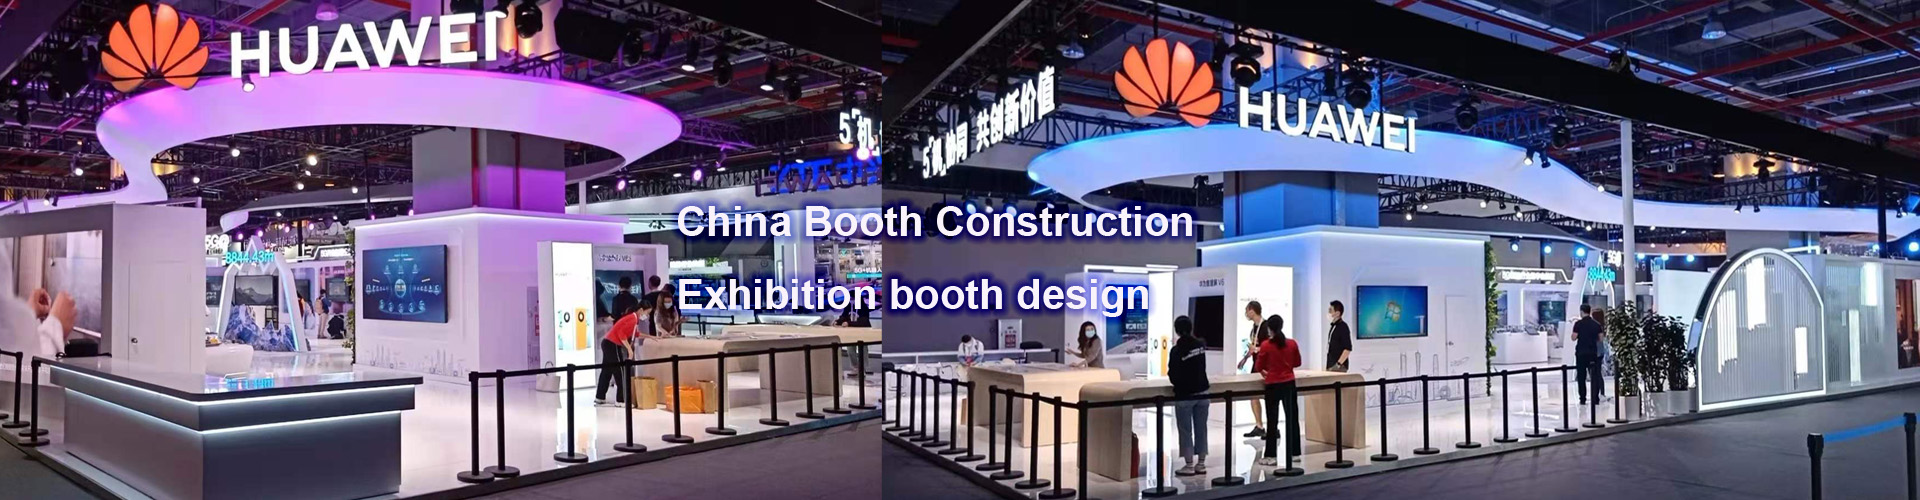 Huawei exhibition booth design China